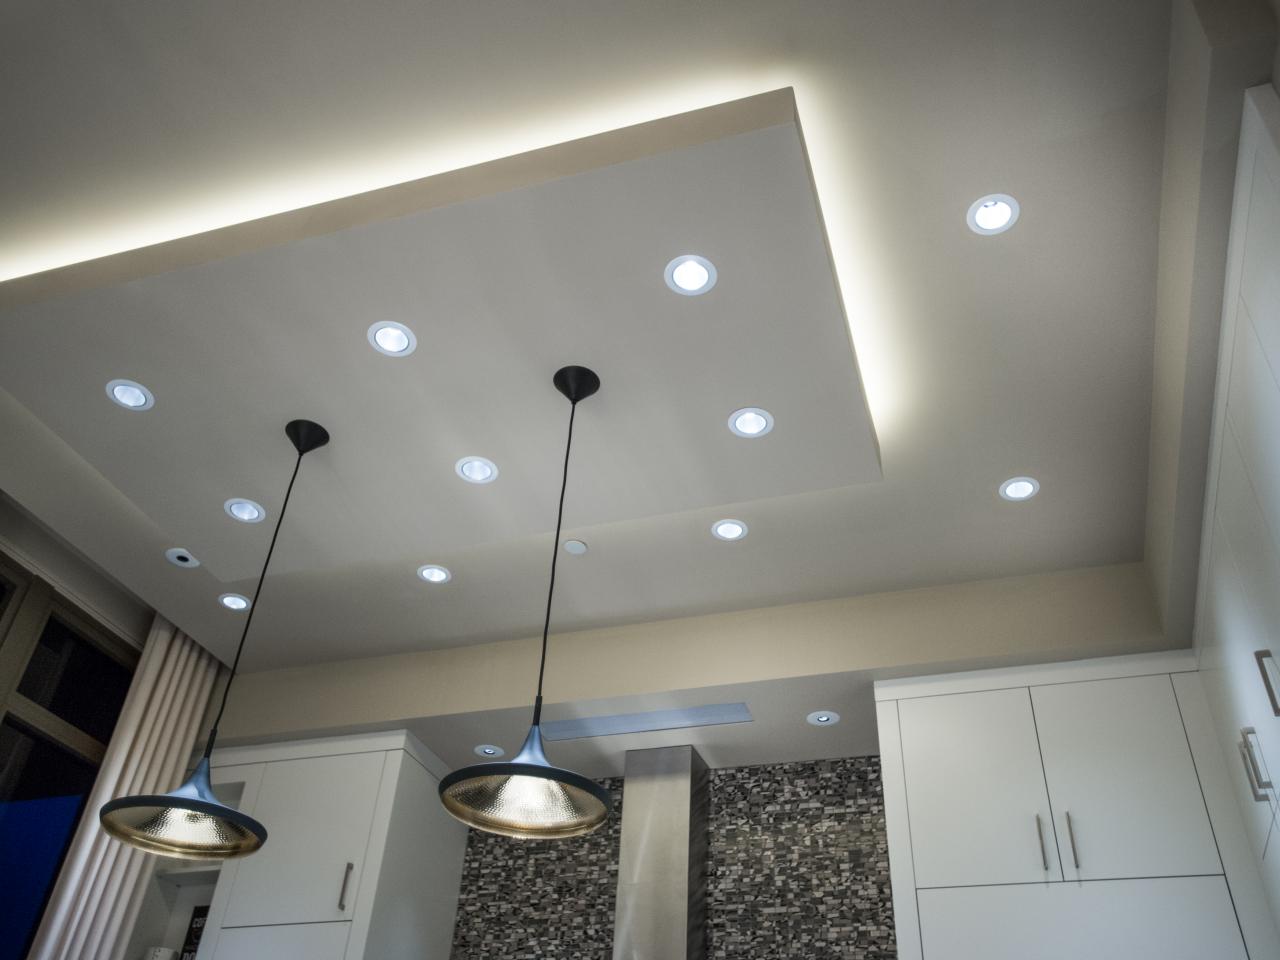 How To Put Recessed Lights In The Ceiling - How To Attach Track Lighting Drop Ceiling